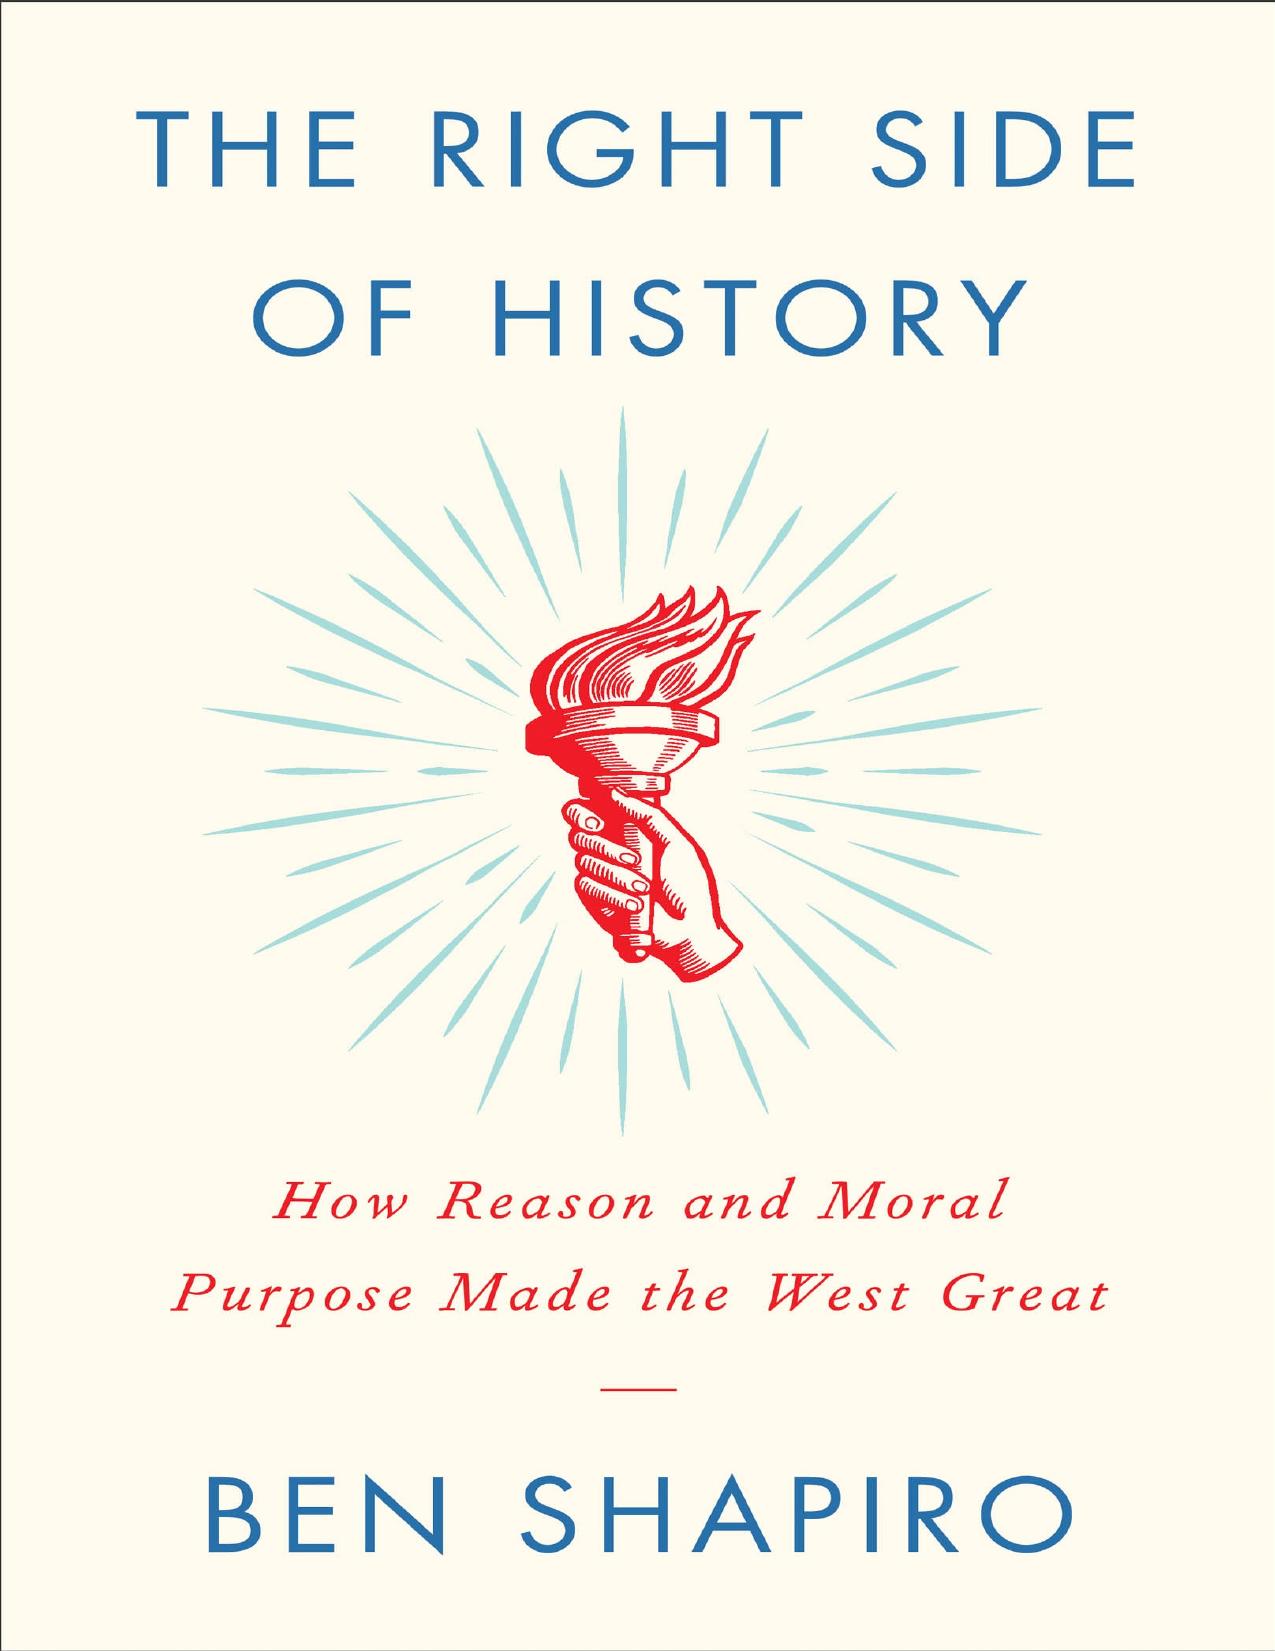 The Right Side of History: How Reason and Moral Purpose Made the West Great - PDFDrive.com